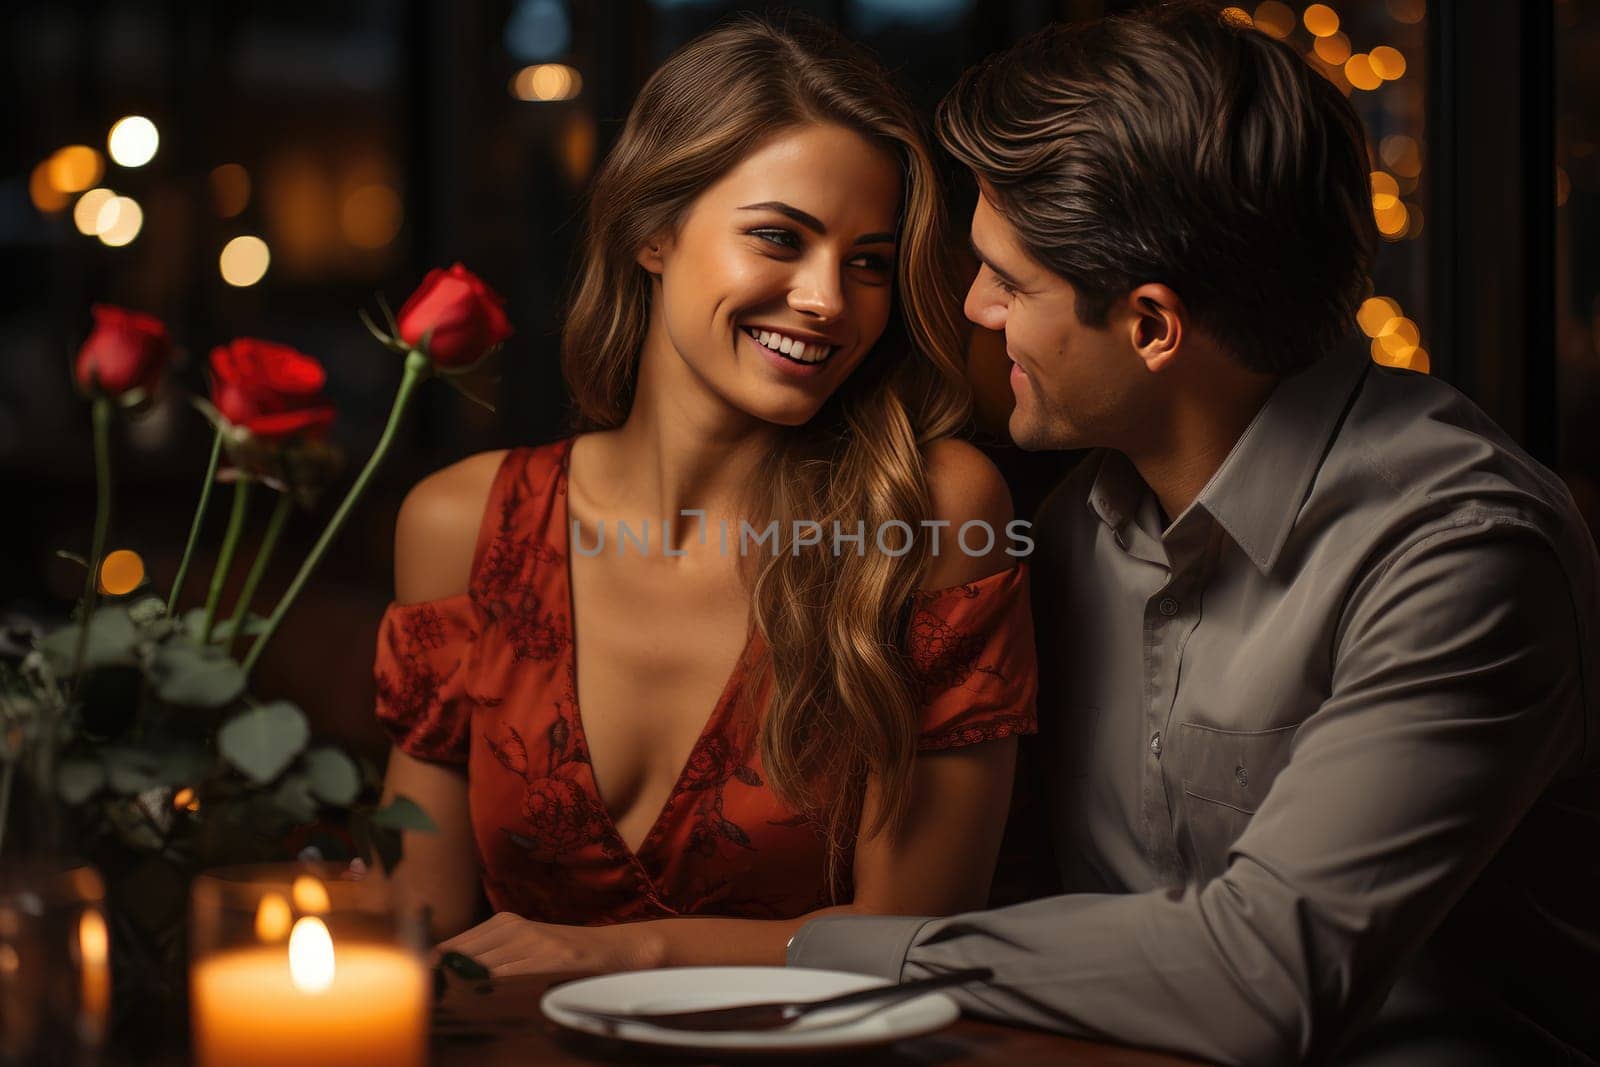 Creating Magic: Woman Preparing Romantic Dinner For Husband For Valentine's Day by Yurich32